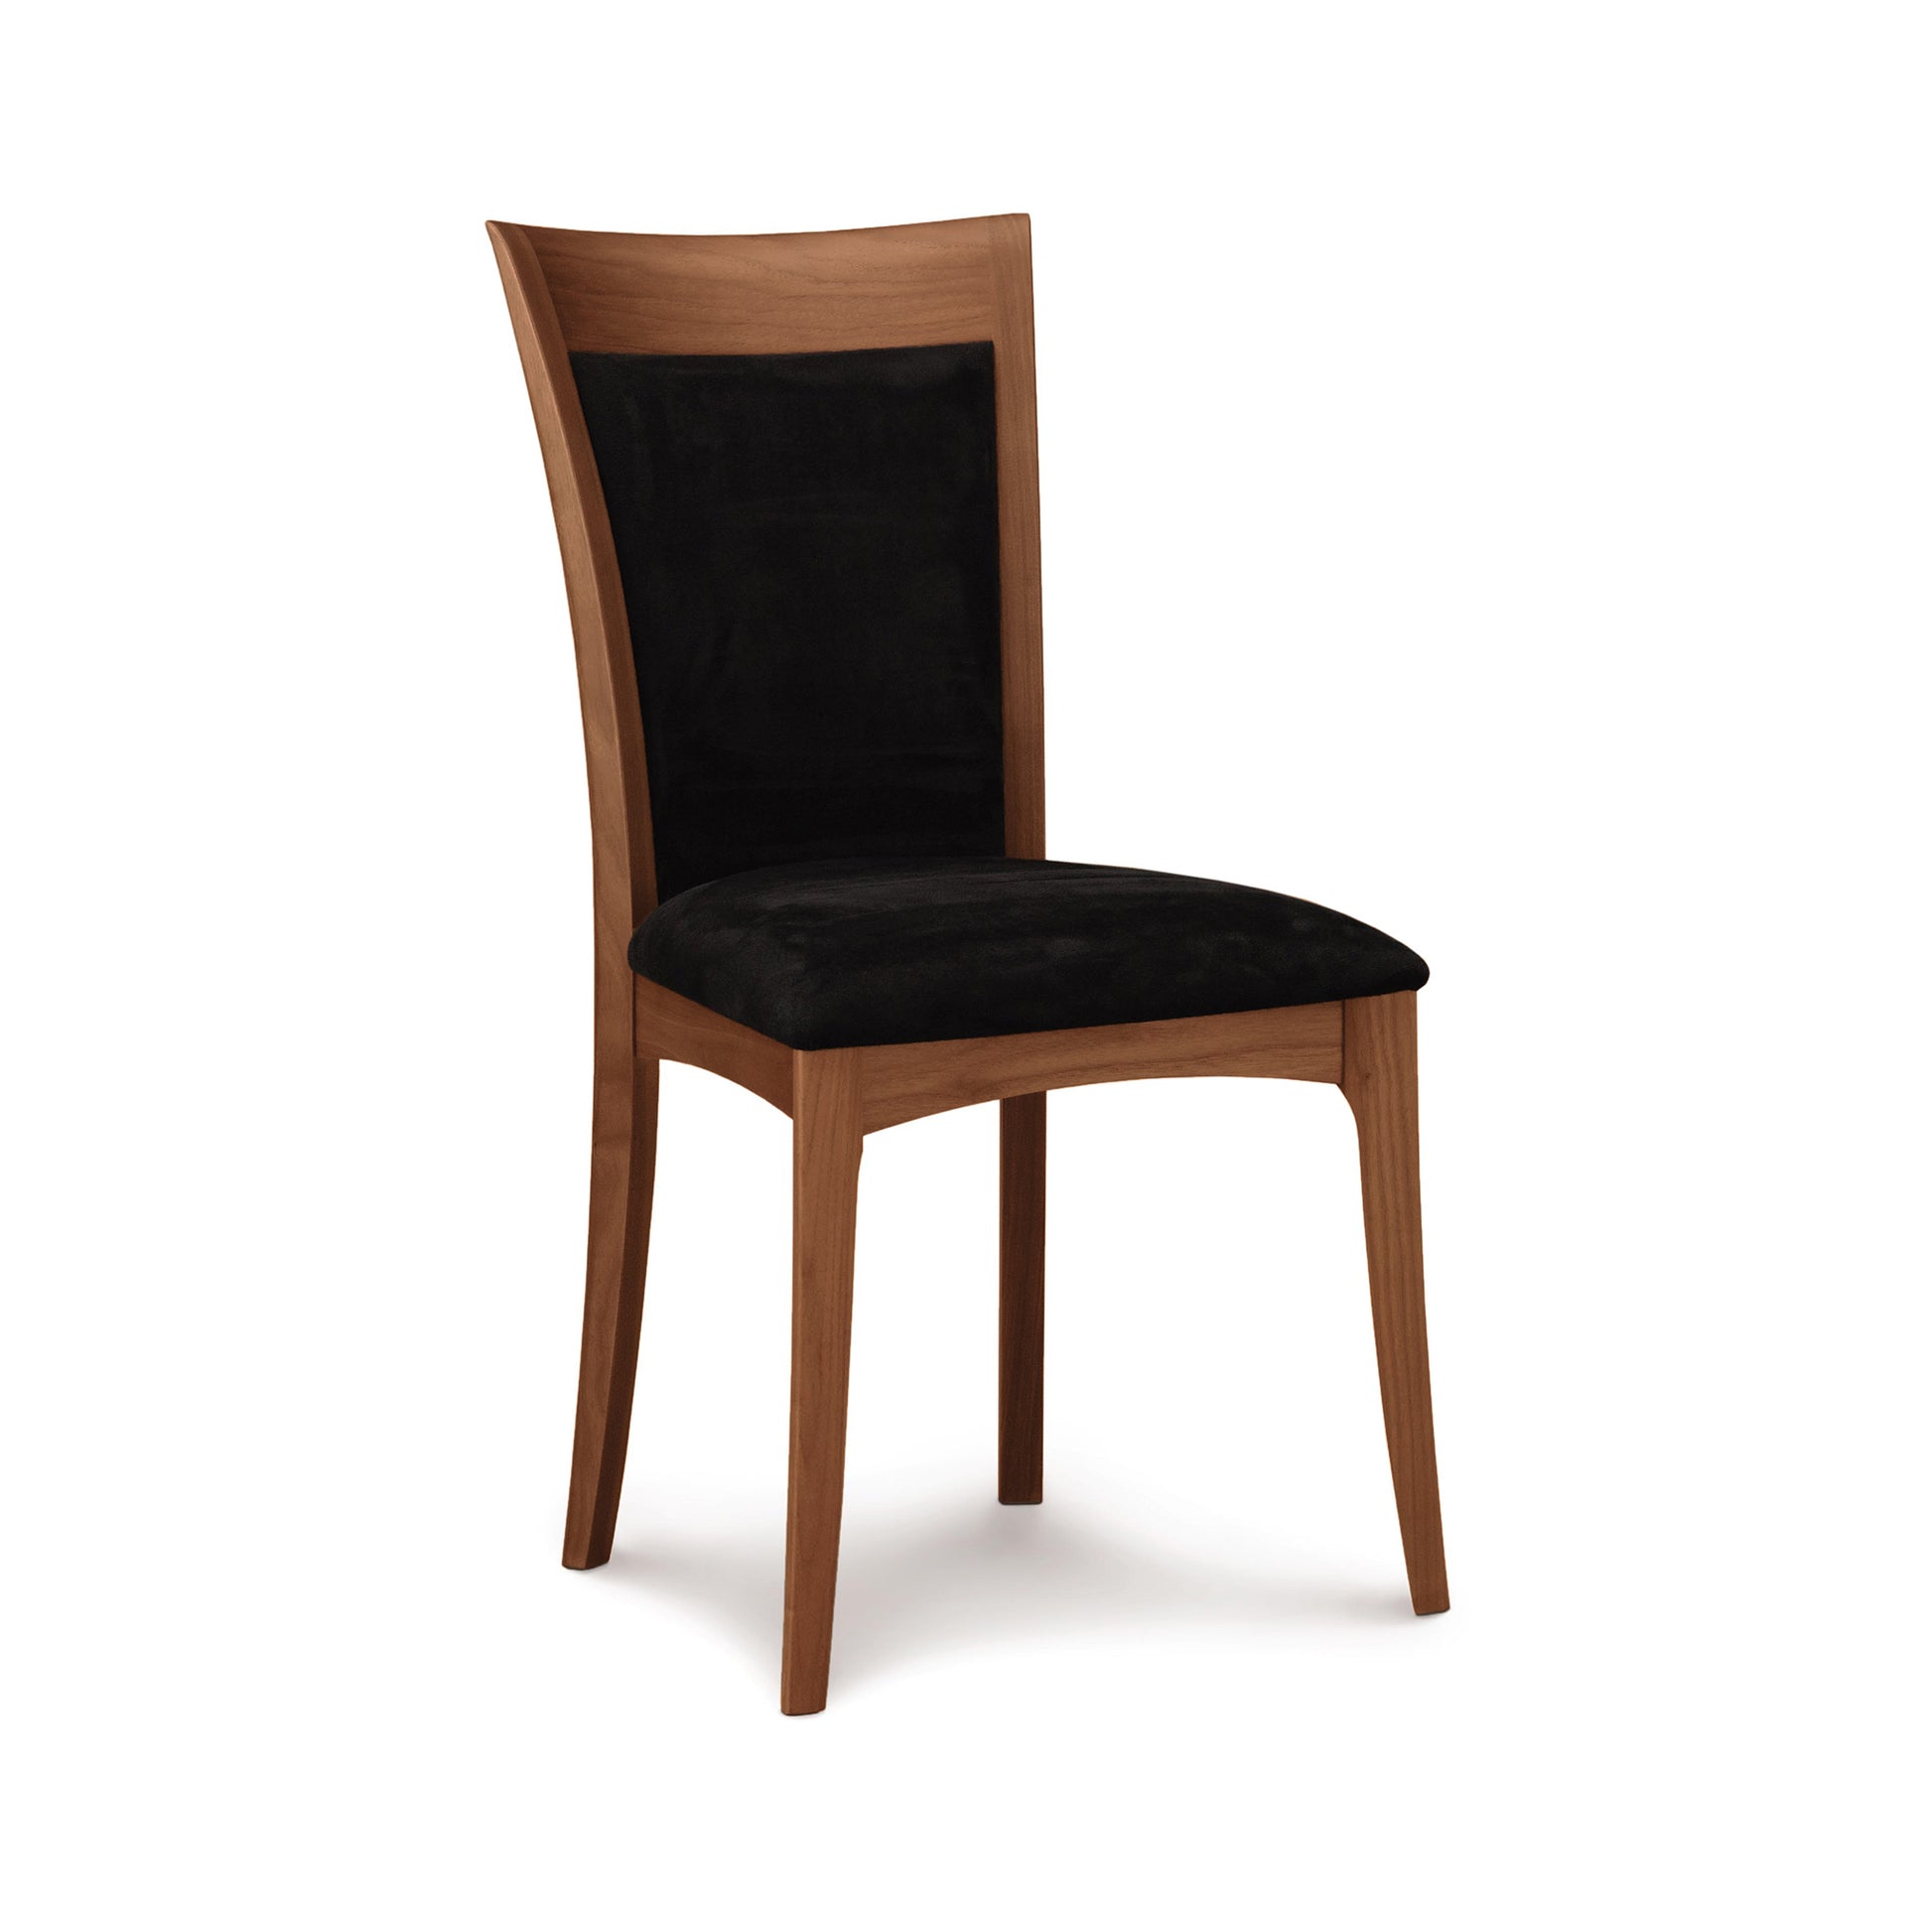 A Morgan Shaker Chair crafted from American Black Cherry, with a black upholstered seat and backrest, against a white background.